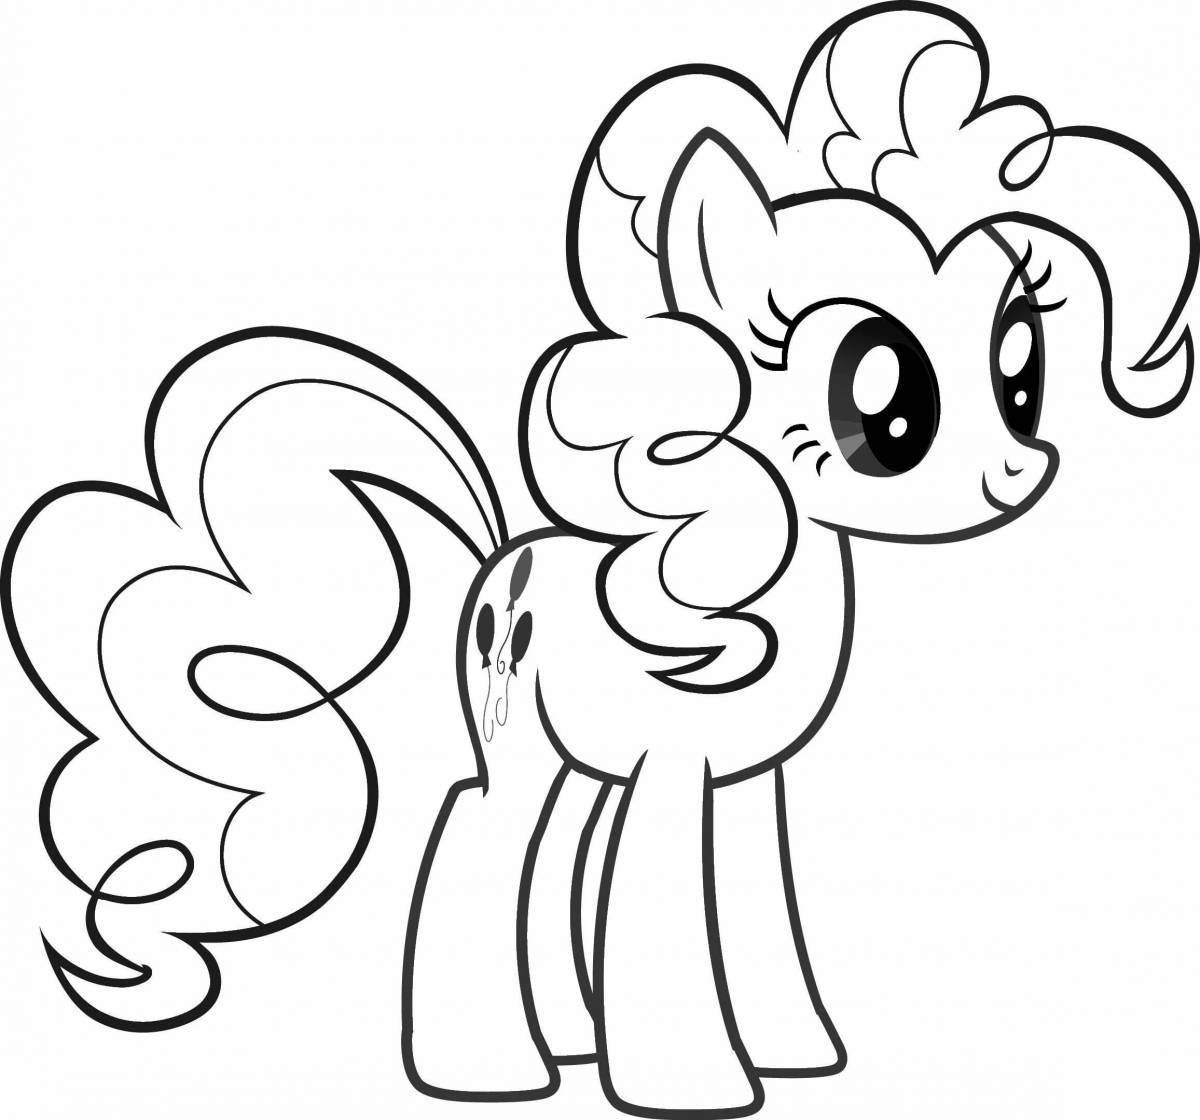 Coloring page happy pony for children 6-7 years old